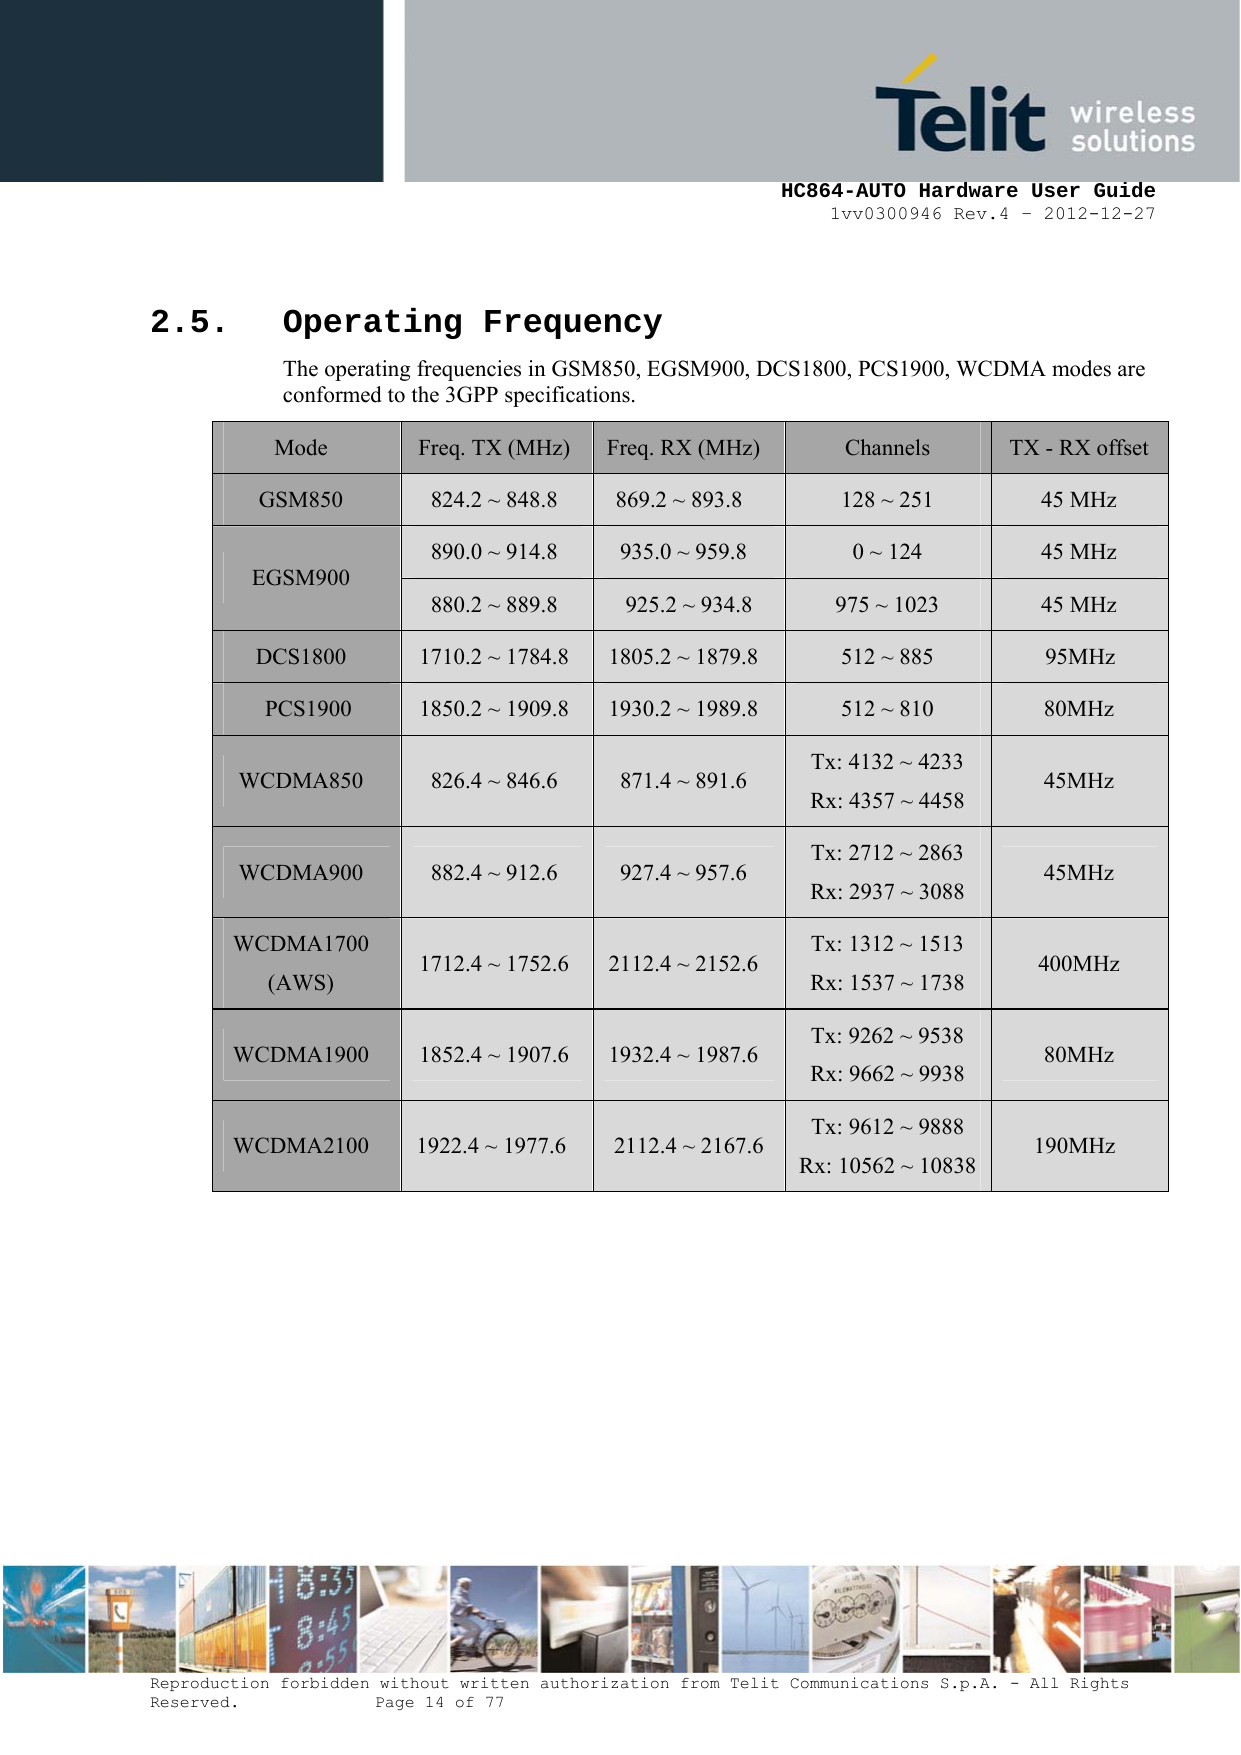     HC864-AUTO Hardware User Guide 1vv0300946 Rev.4 – 2012-12-27 Reproduction forbidden without written authorization from Telit Communications S.p.A. - All Rights Reserved.    Page 14 of 77  2.5. Operating Frequency The operating frequencies in GSM850, EGSM900, DCS1800, PCS1900, WCDMA modes are conformed to the 3GPP specifications. Mode  Freq. TX (MHz)  Freq. RX (MHz)  Channels  TX - RX offset GSM850  824.2 ~ 848.8   869.2 ~ 893.8  128 ~ 251  45 MHz 890.0 ~ 914.8  935.0 ~ 959.8  0 ~ 124  45 MHz EGSM900 880.2 ~ 889.8  925.2 ~ 934.8  975 ~ 1023  45 MHz DCS1800  1710.2 ~ 1784.8  1805.2 ~ 1879.8  512 ~ 885  95MHz PCS1900  1850.2 ~ 1909.8  1930.2 ~ 1989.8  512 ~ 810  80MHz WCDMA850  826.4 ~ 846.6  871.4 ~ 891.6  Tx: 4132 ~ 4233 Rx: 4357 ~ 4458  45MHz WCDMA900  882.4 ~ 912.6  927.4 ~ 957.6  Tx: 2712 ~ 2863 Rx: 2937 ~ 3088  45MHz WCDMA1700 (AWS)  1712.4 ~ 1752.6  2112.4 ~ 2152.6  Tx: 1312 ~ 1513 Rx: 1537 ~ 1738  400MHz WCDMA1900  1852.4 ~ 1907.6  1932.4 ~ 1987.6  Tx: 9262 ~ 9538 Rx: 9662 ~ 9938  80MHz WCDMA2100  1922.4 ~ 1977.6  2112.4 ~ 2167.6  Tx: 9612 ~ 9888 Rx: 10562 ~ 10838  190MHz  